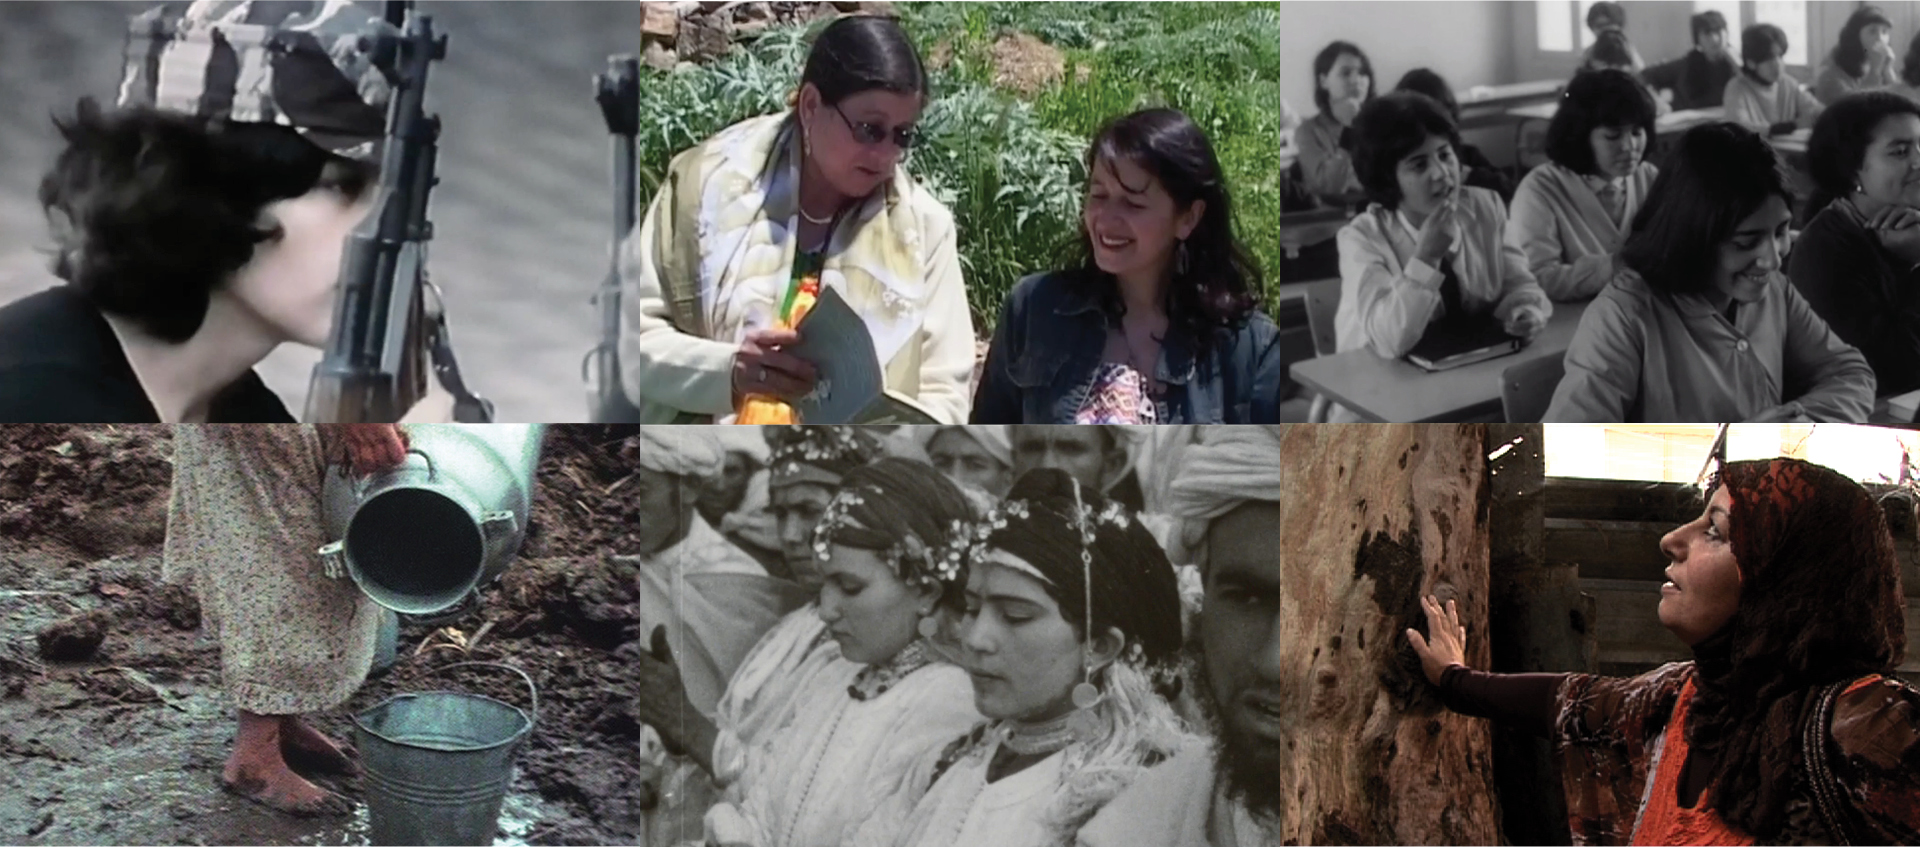 Six images, from left a woman holding a military weapon, two women sharing a book out in the fields, multiple female students sitting behind their desks in the classroom, a woman pouring into a bucket, multiple well dressed women looking down, and a woman in hijab resting her arm on a tree trunk looking up.